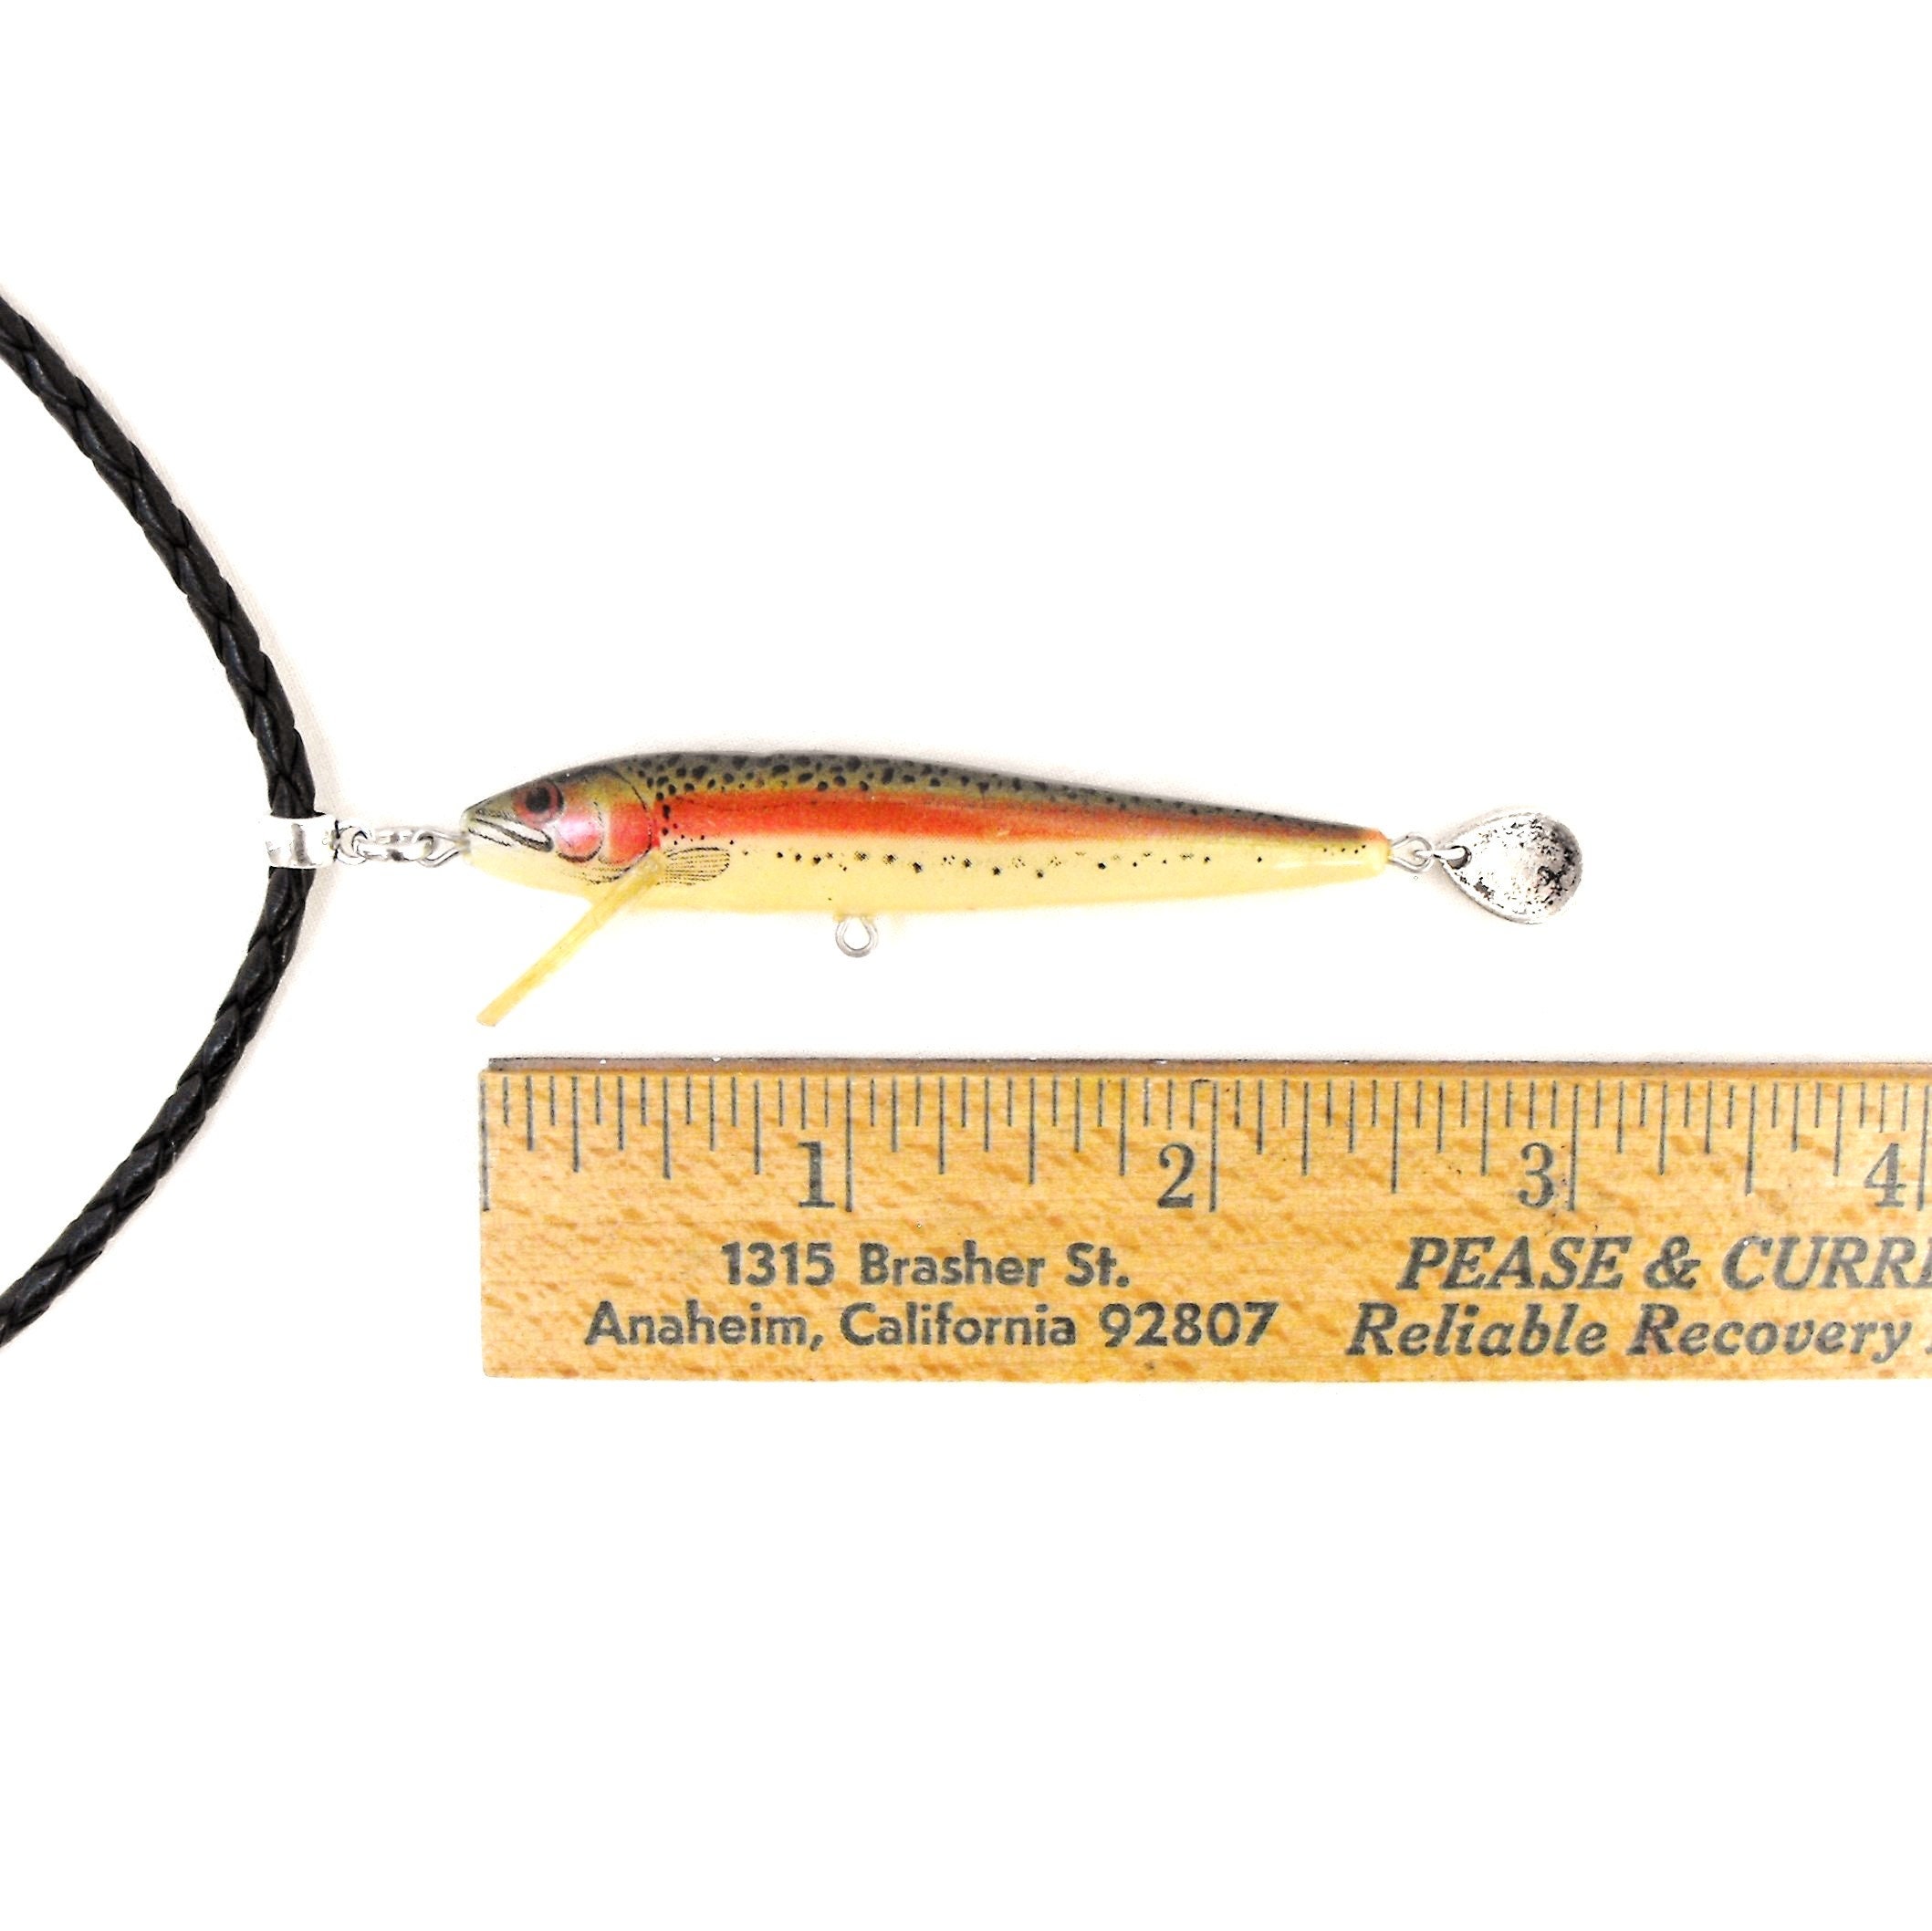 Fishing Lure Necklace, Vintage Fingerling Lure on Braided Leather